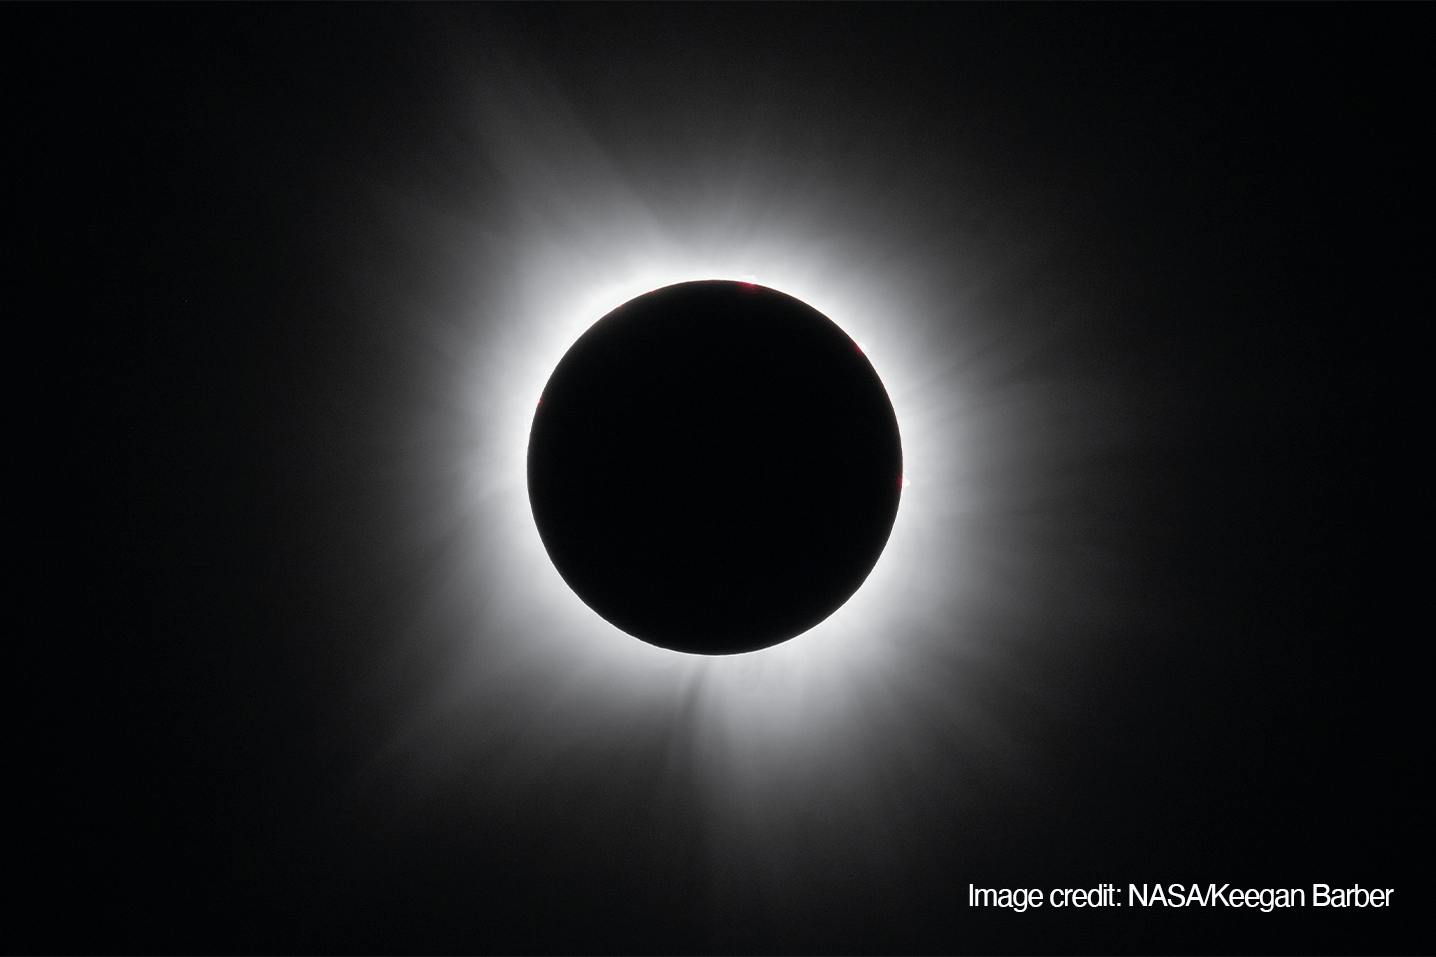 A black disk appears in the middle of the photo with white rays radiating out from the circle, gently fading into the black background.